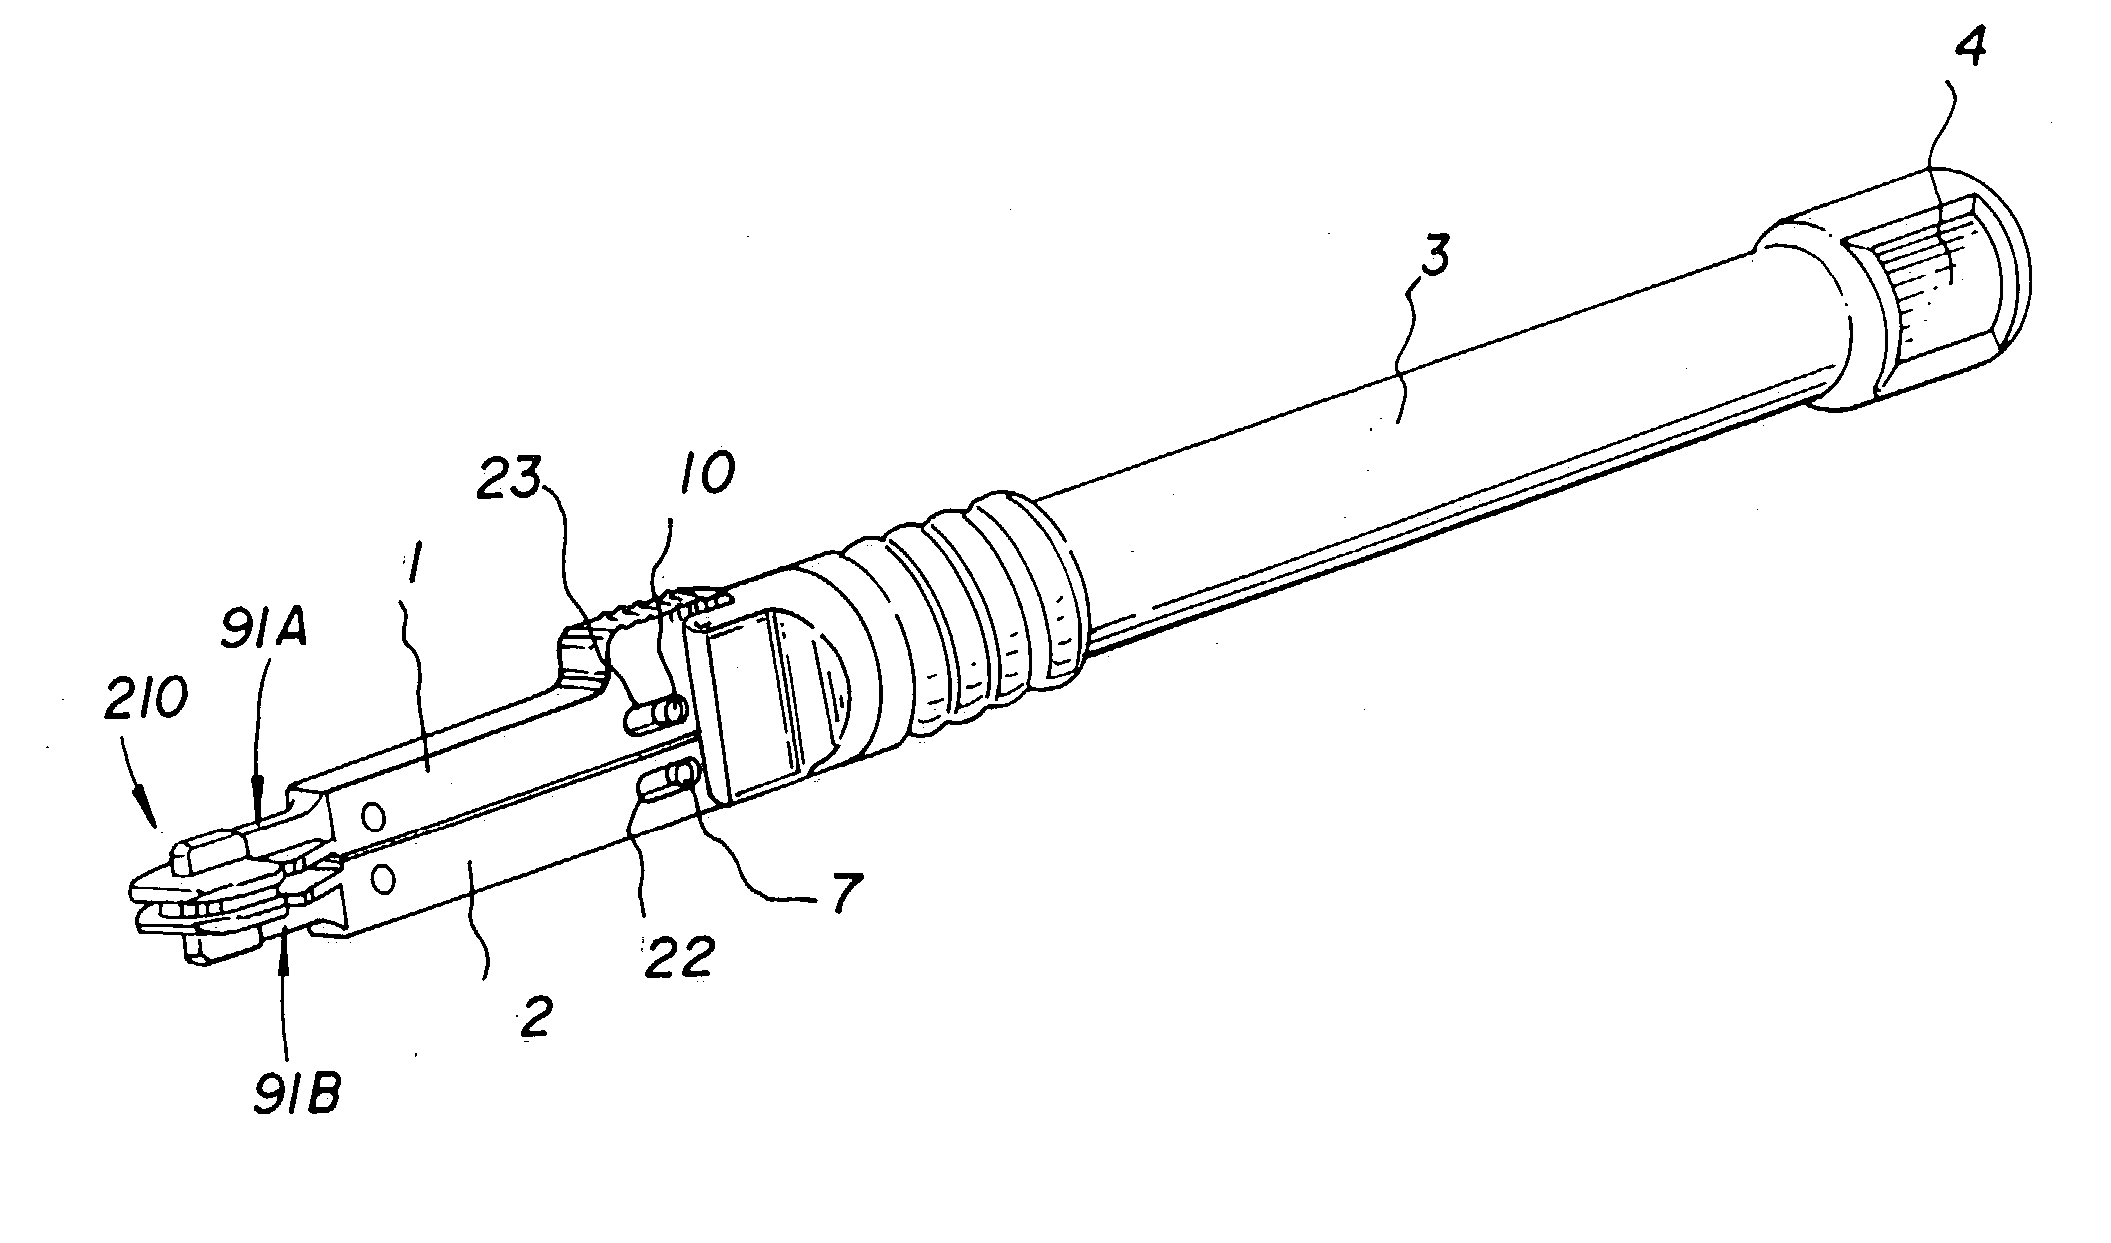 Instruments and method for inserting an intervertebral implant